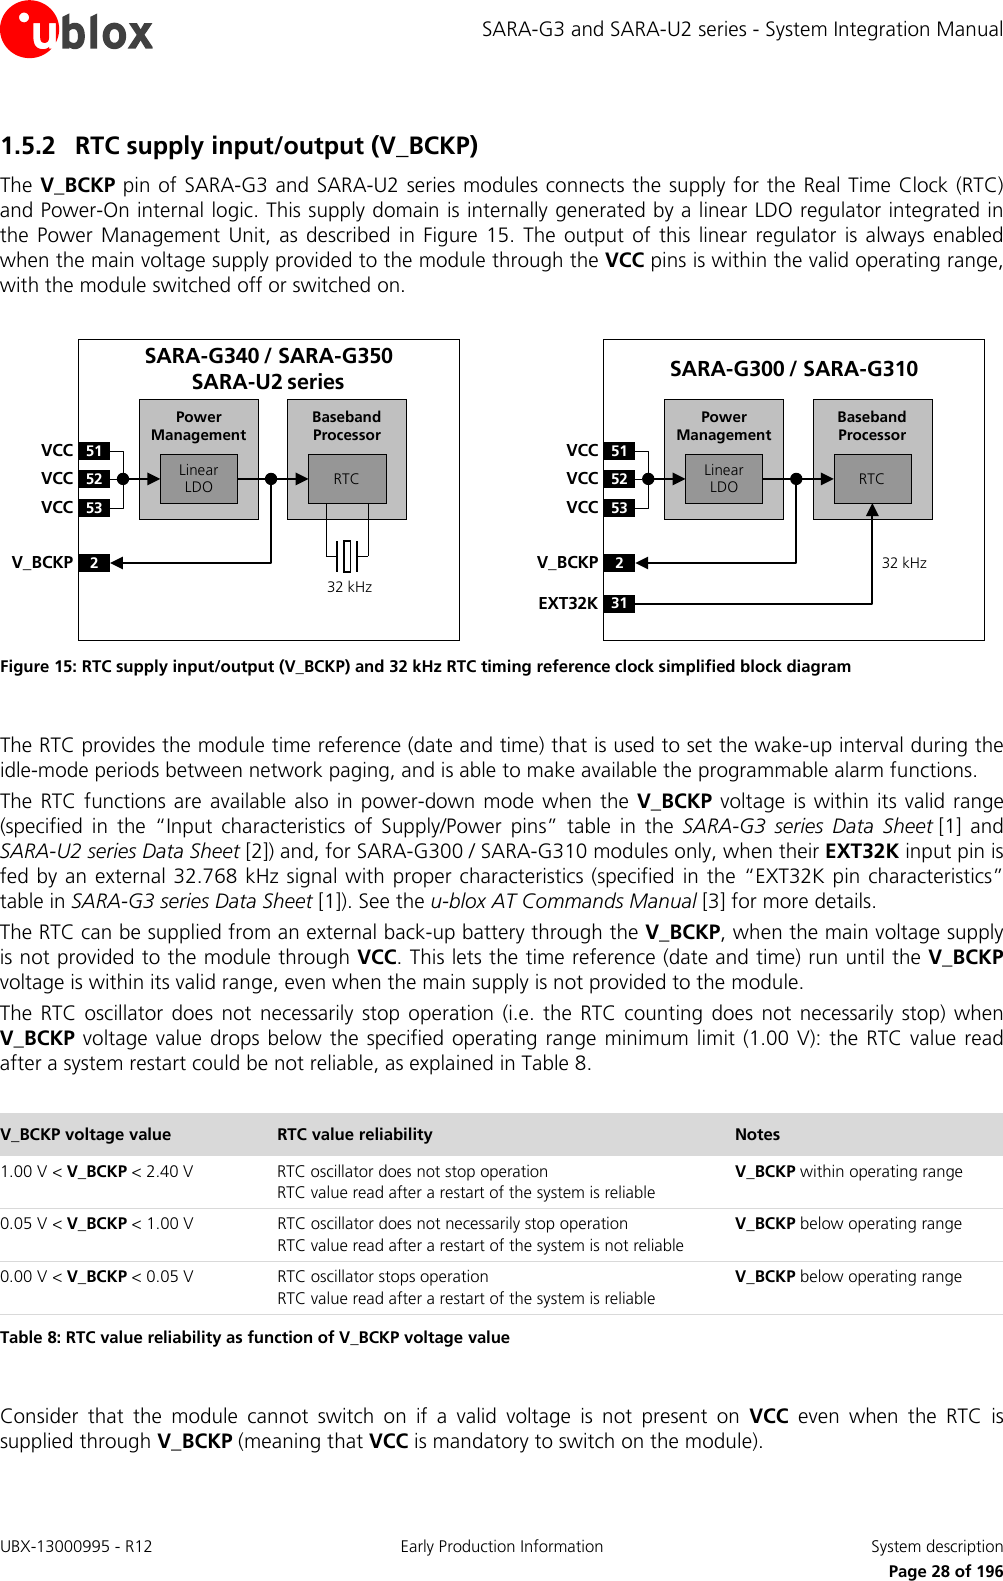 SARA-G3 and SARA-U2 series - System Integration Manual 1.5.2 RTC supply input/output (V_BCKP) The V_BCKP pin of SARA-G3 and SARA-U2 series modules connects the supply for the Real Time Clock (RTC) and Power-On internal logic. This supply domain is internally generated by a linear LDO regulator integrated in the Power Management Unit, as described in Figure  15. The output of this linear regulator is always enabled when the main voltage supply provided to the module through the VCC pins is within the valid operating range, with the module switched off or switched on.  Baseband Processor51VCC52VCC53VCC2V_BCKPLinear LDO RTCPower ManagementSARA-G340 / SARA-G350SARA-U2 series32 kHzBaseband Processor51VCC52VCC53VCC2V_BCKPLinear LDO RTCPower ManagementSARA-G300 / SARA-G31032 kHz31EXT32K Figure 15: RTC supply input/output (V_BCKP) and 32 kHz RTC timing reference clock simplified block diagram  The RTC provides the module time reference (date and time) that is used to set the wake-up interval during the idle-mode periods between network paging, and is able to make available the programmable alarm functions. The RTC functions are available also in power-down mode when the V_BCKP voltage is within its valid range (specified in the “Input characteristics of Supply/Power pins”  table in the  SARA-G3 series Data Sheet [1] and SARA-U2 series Data Sheet [2]) and, for SARA-G300 / SARA-G310 modules only, when their EXT32K input pin is fed by an external 32.768 kHz signal with proper characteristics (specified in the “EXT32K pin characteristics” table in SARA-G3 series Data Sheet [1]). See the u-blox AT Commands Manual [3] for more details. The RTC can be supplied from an external back-up battery through the V_BCKP, when the main voltage supply is not provided to the module through VCC. This lets the time reference (date and time) run until the V_BCKP voltage is within its valid range, even when the main supply is not provided to the module. The RTC oscillator does  not necessarily stop operation (i.e. the RTC counting does not necessarily stop) when V_BCKP voltage value drops below the specified operating range minimum limit (1.00 V): the RTC value read after a system restart could be not reliable, as explained in Table 8.  V_BCKP voltage value RTC value reliability Notes 1.00 V &lt; V_BCKP &lt; 2.40 V RTC oscillator does not stop operation RTC value read after a restart of the system is reliable V_BCKP within operating range 0.05 V &lt; V_BCKP &lt; 1.00 V RTC oscillator does not necessarily stop operation RTC value read after a restart of the system is not reliable V_BCKP below operating range 0.00 V &lt; V_BCKP &lt; 0.05 V RTC oscillator stops operation RTC value read after a restart of the system is reliable V_BCKP below operating range Table 8: RTC value reliability as function of V_BCKP voltage value   Consider that the module cannot switch on if a valid voltage is not present on VCC even when the RTC is supplied through V_BCKP (meaning that VCC is mandatory to switch on the module). UBX-13000995 - R12 Early Production Information System description     Page 28 of 196 